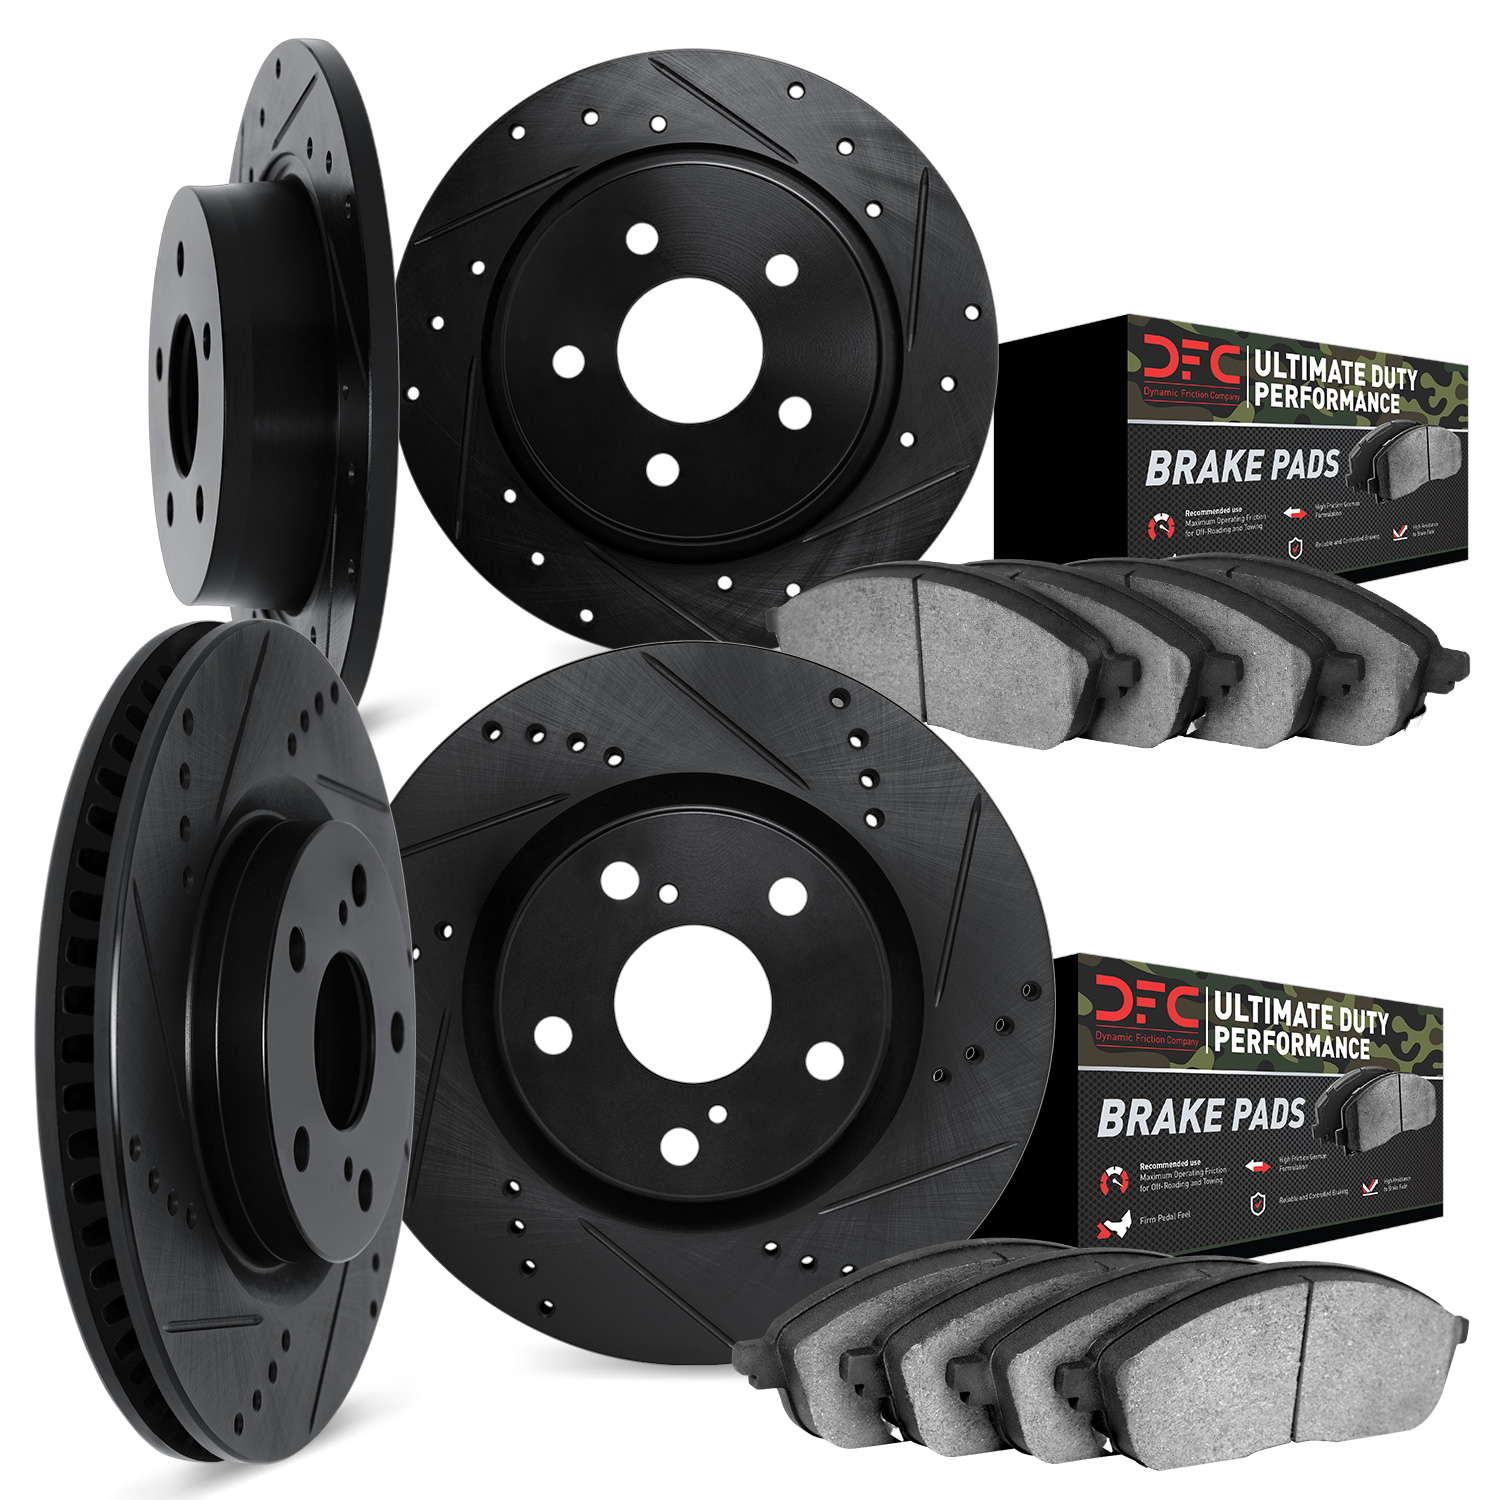 8404-42003 Drilled/Slotted Brake Rotors with Ultimate-Duty Brake Pads Kit [Black], Fits Select Mopar, Position: Front and Rear